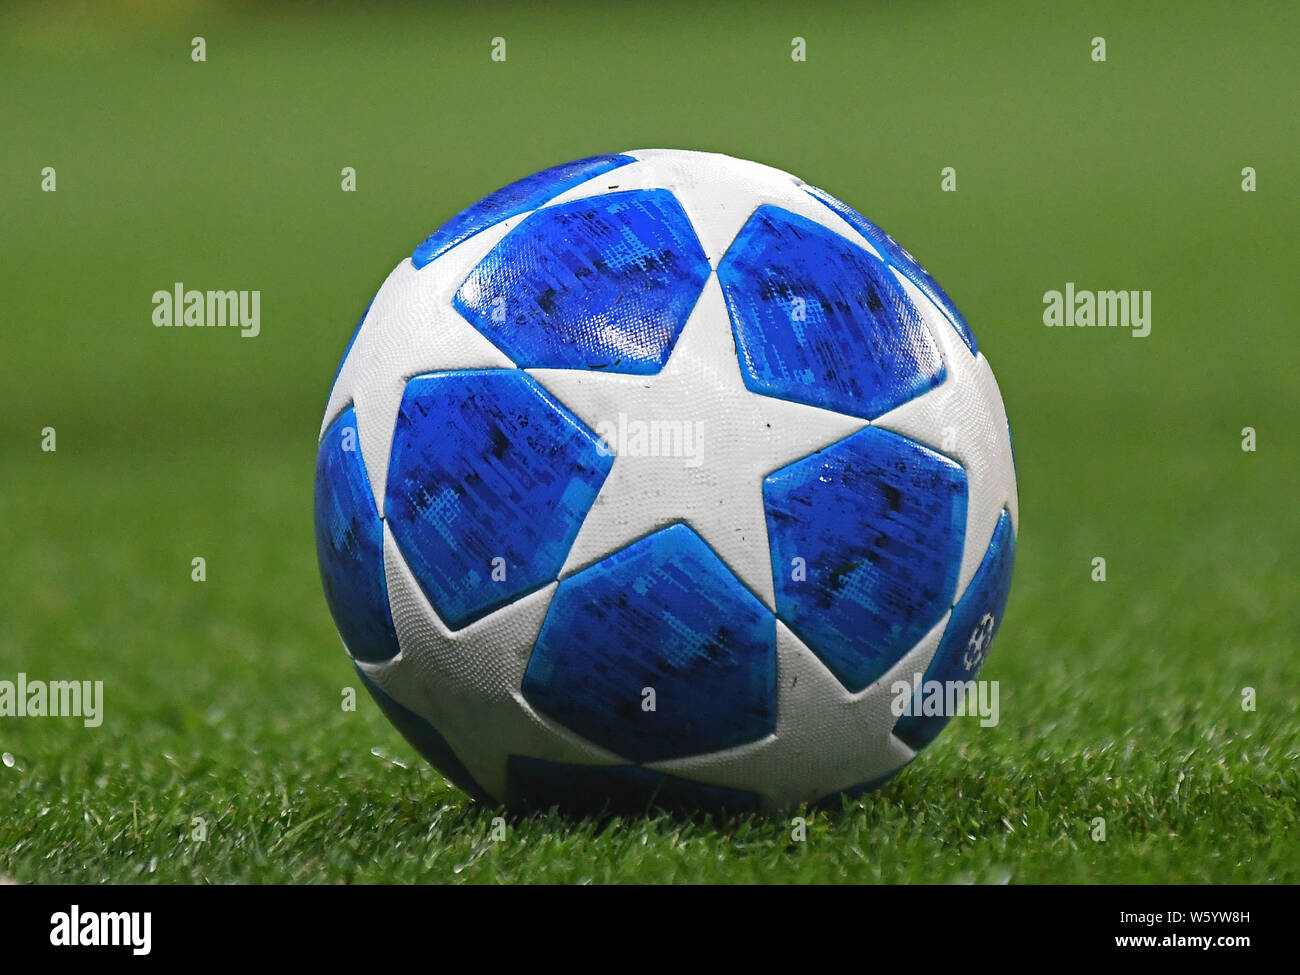 MANCHESTER, ENGLAND - SEPTEMBER 19, 2018: The official UCL match ball  pictured prior to the 2018/19